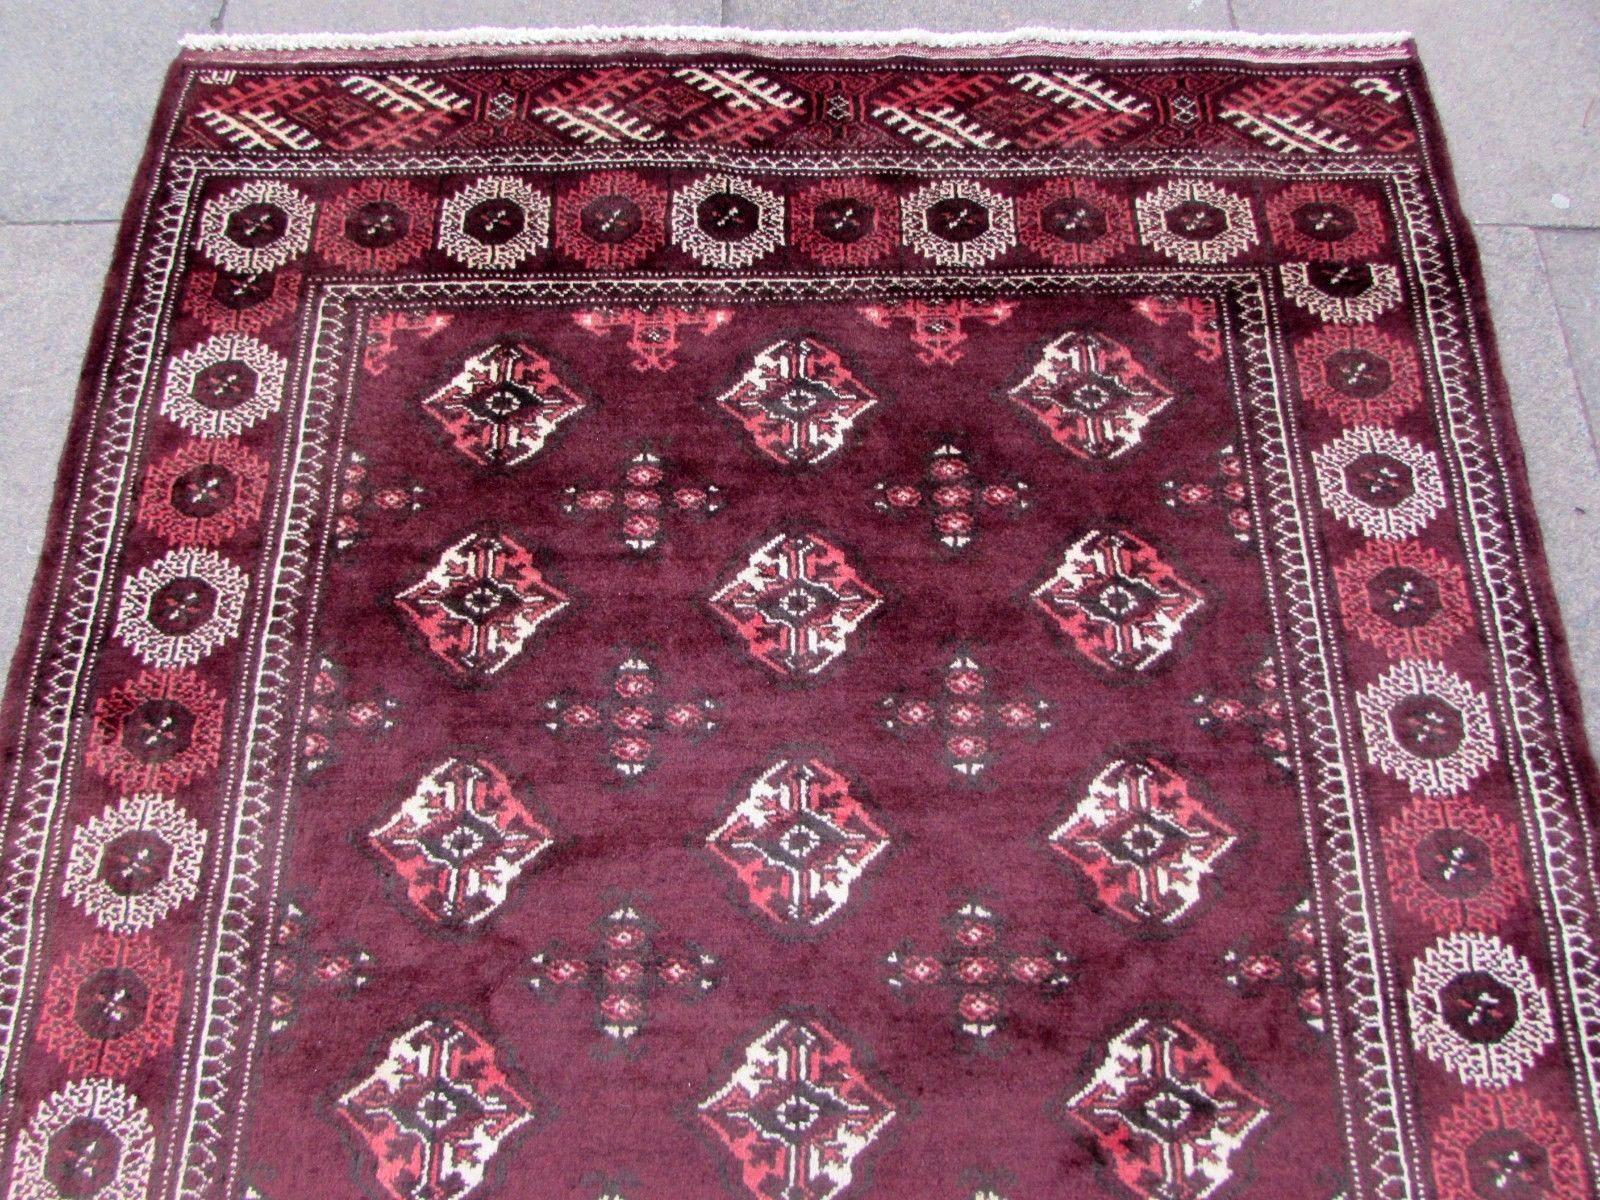 Handmade vintage traditional Turkmen Tekke rug in burgundy wool. The rug has been made in the end of the 20th century, it is in original good condition.

- Condition: original good,

- circa: 1970s,

- Size: 4.11' x 9.4' (147cm x 282cm),

-